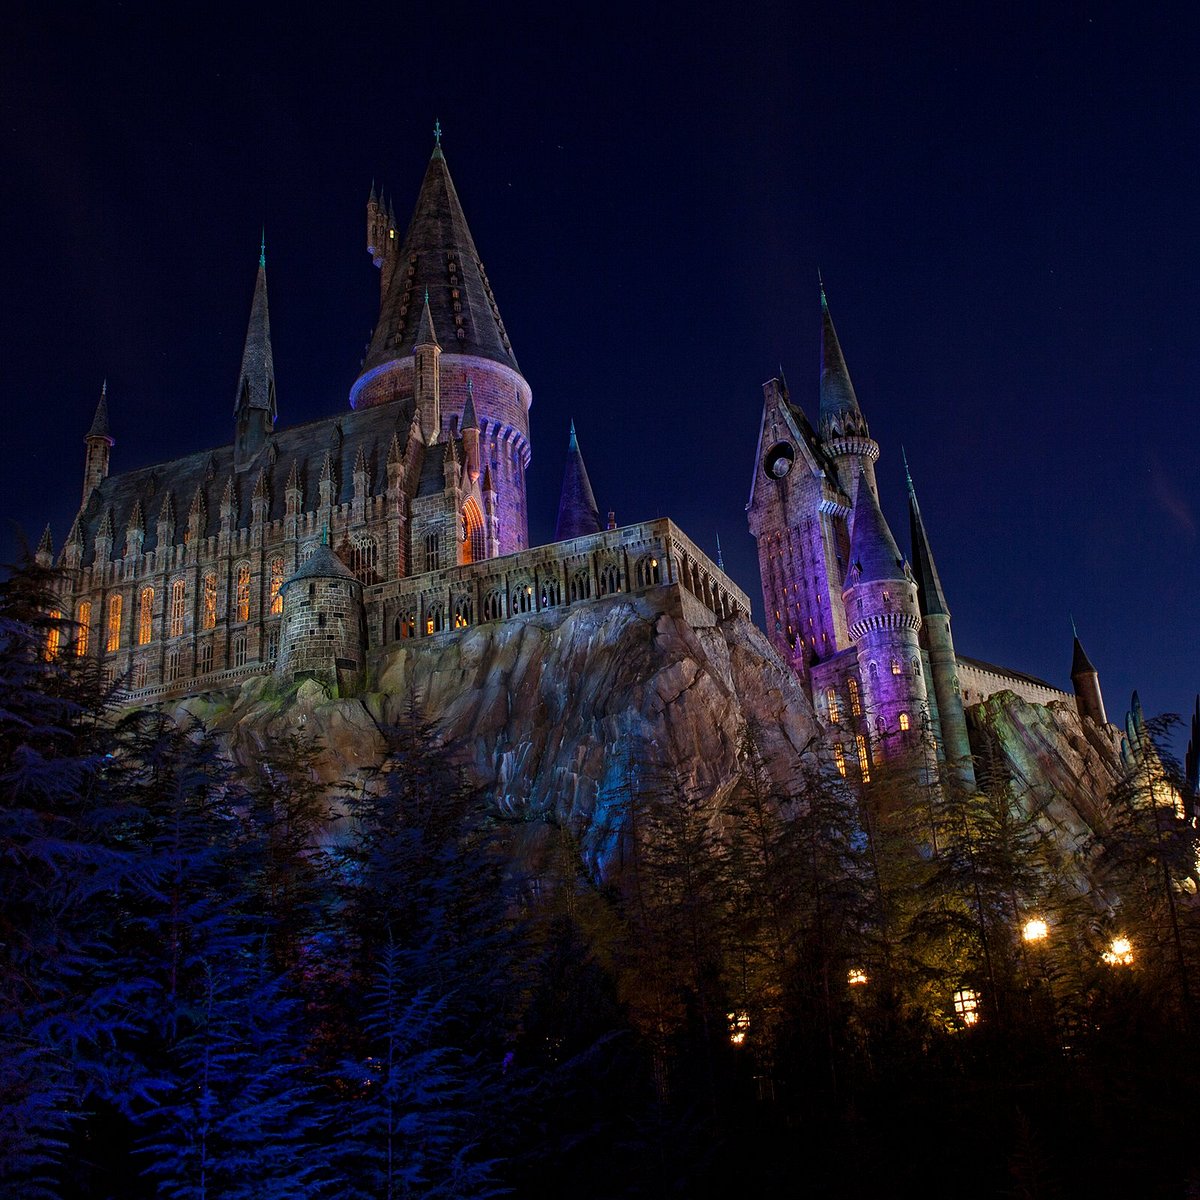 Harry Potter's Wizarding World gets an incredible new light show